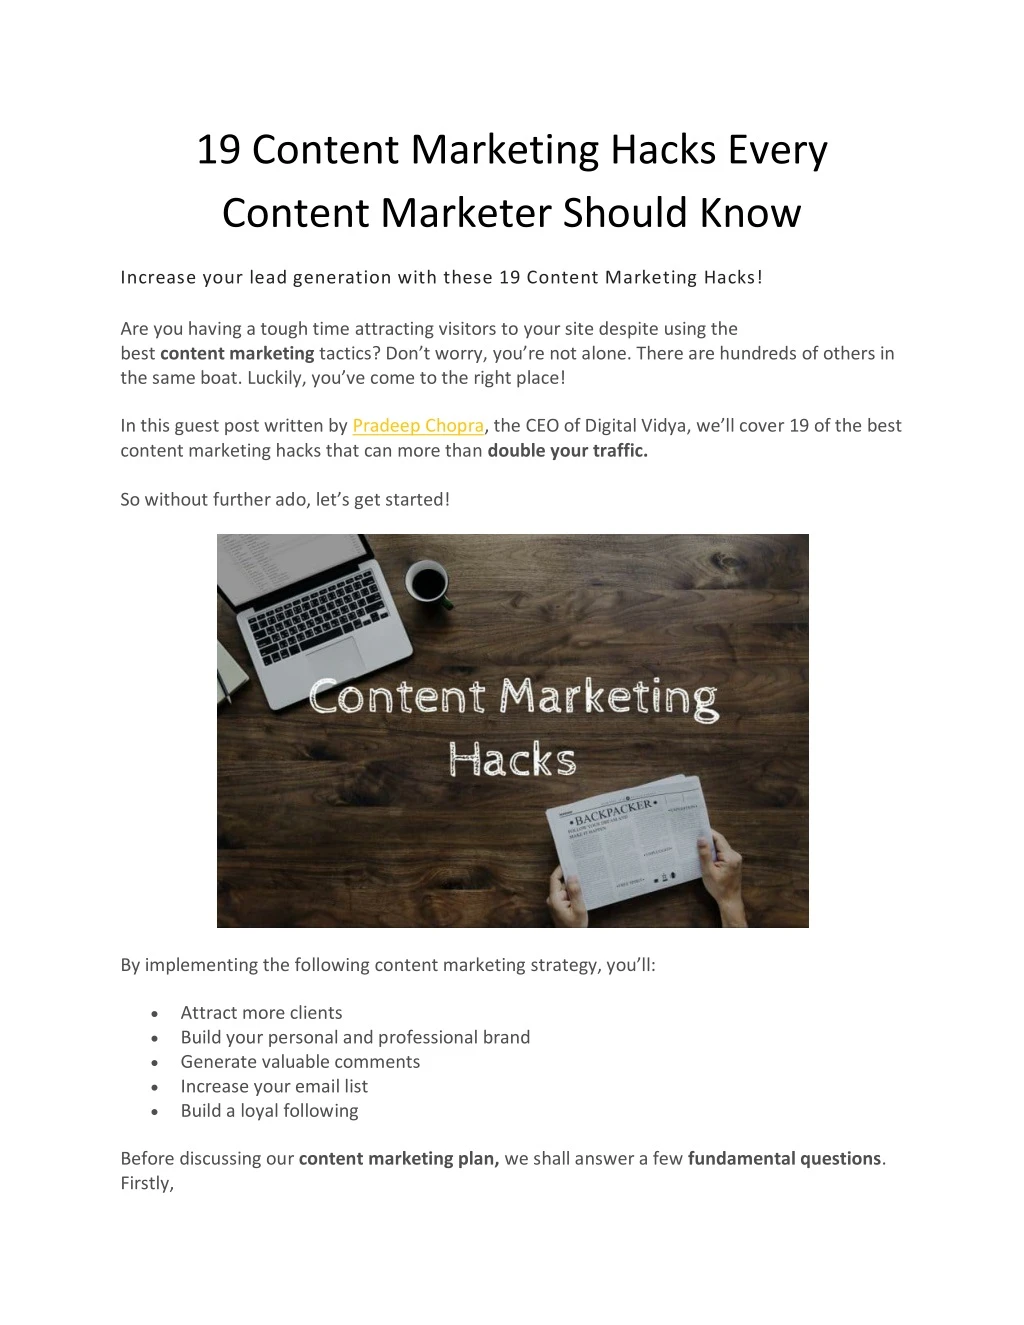 19 content marketing hacks every content marketer